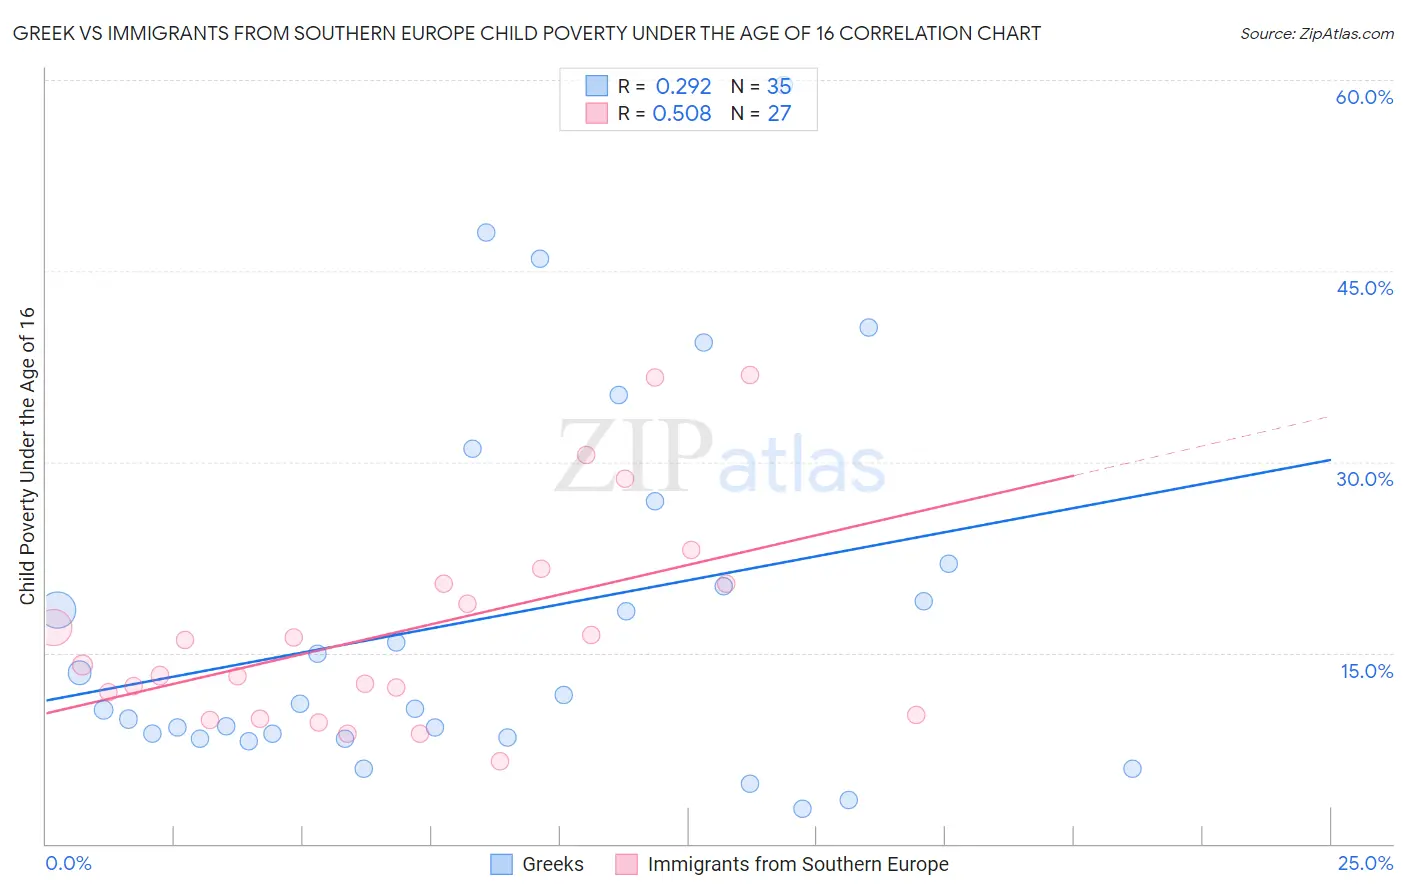 Greek vs Immigrants from Southern Europe Child Poverty Under the Age of 16